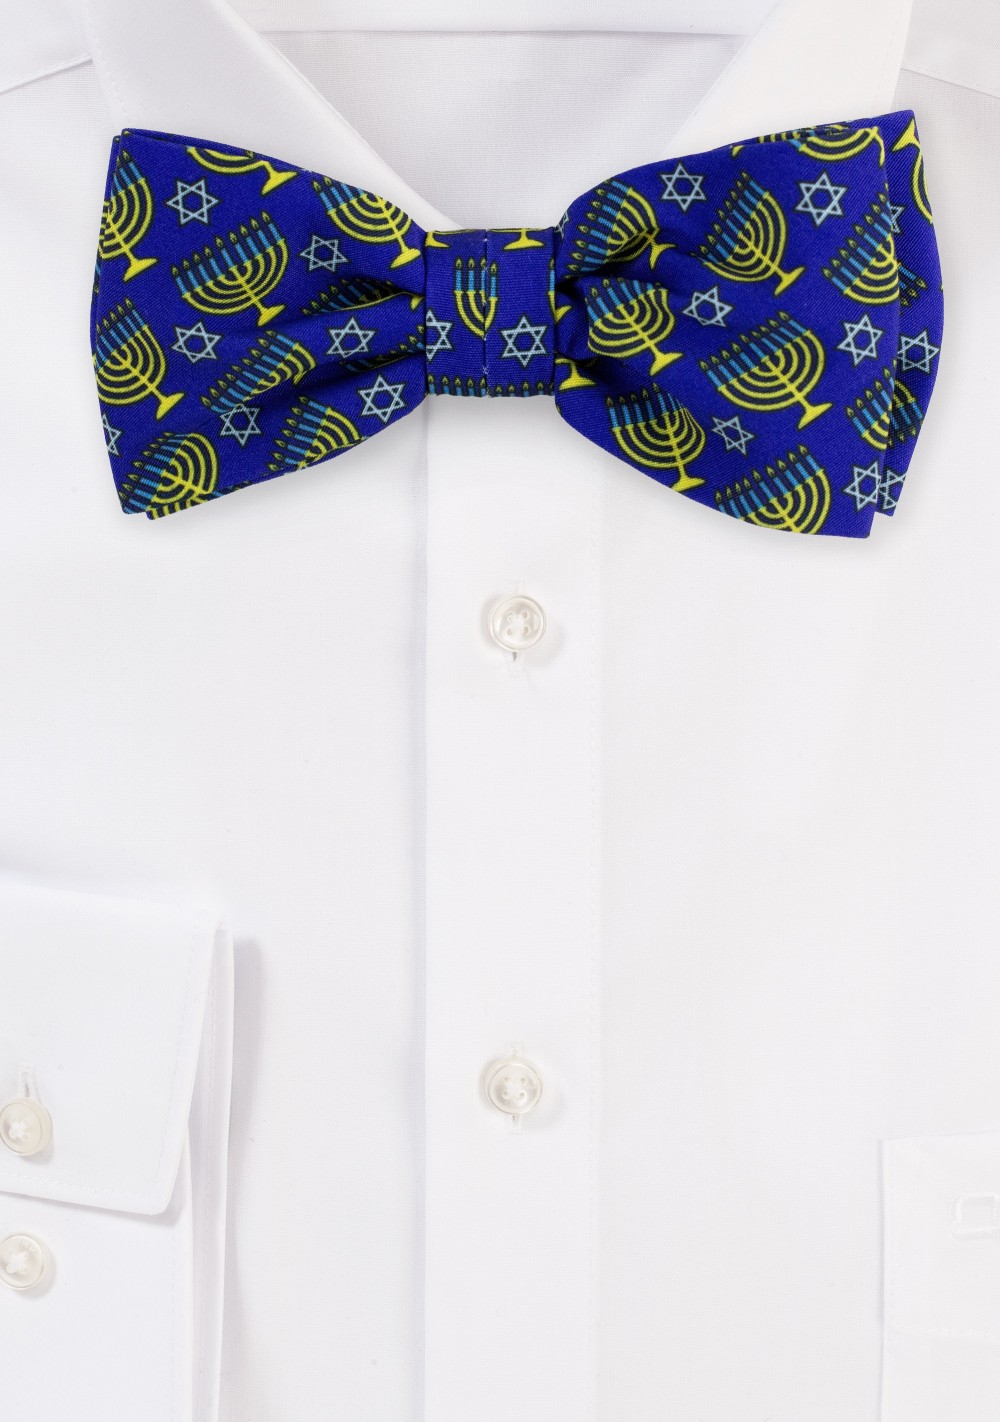 Blue Bow Tie with Menorahs and Stars of David